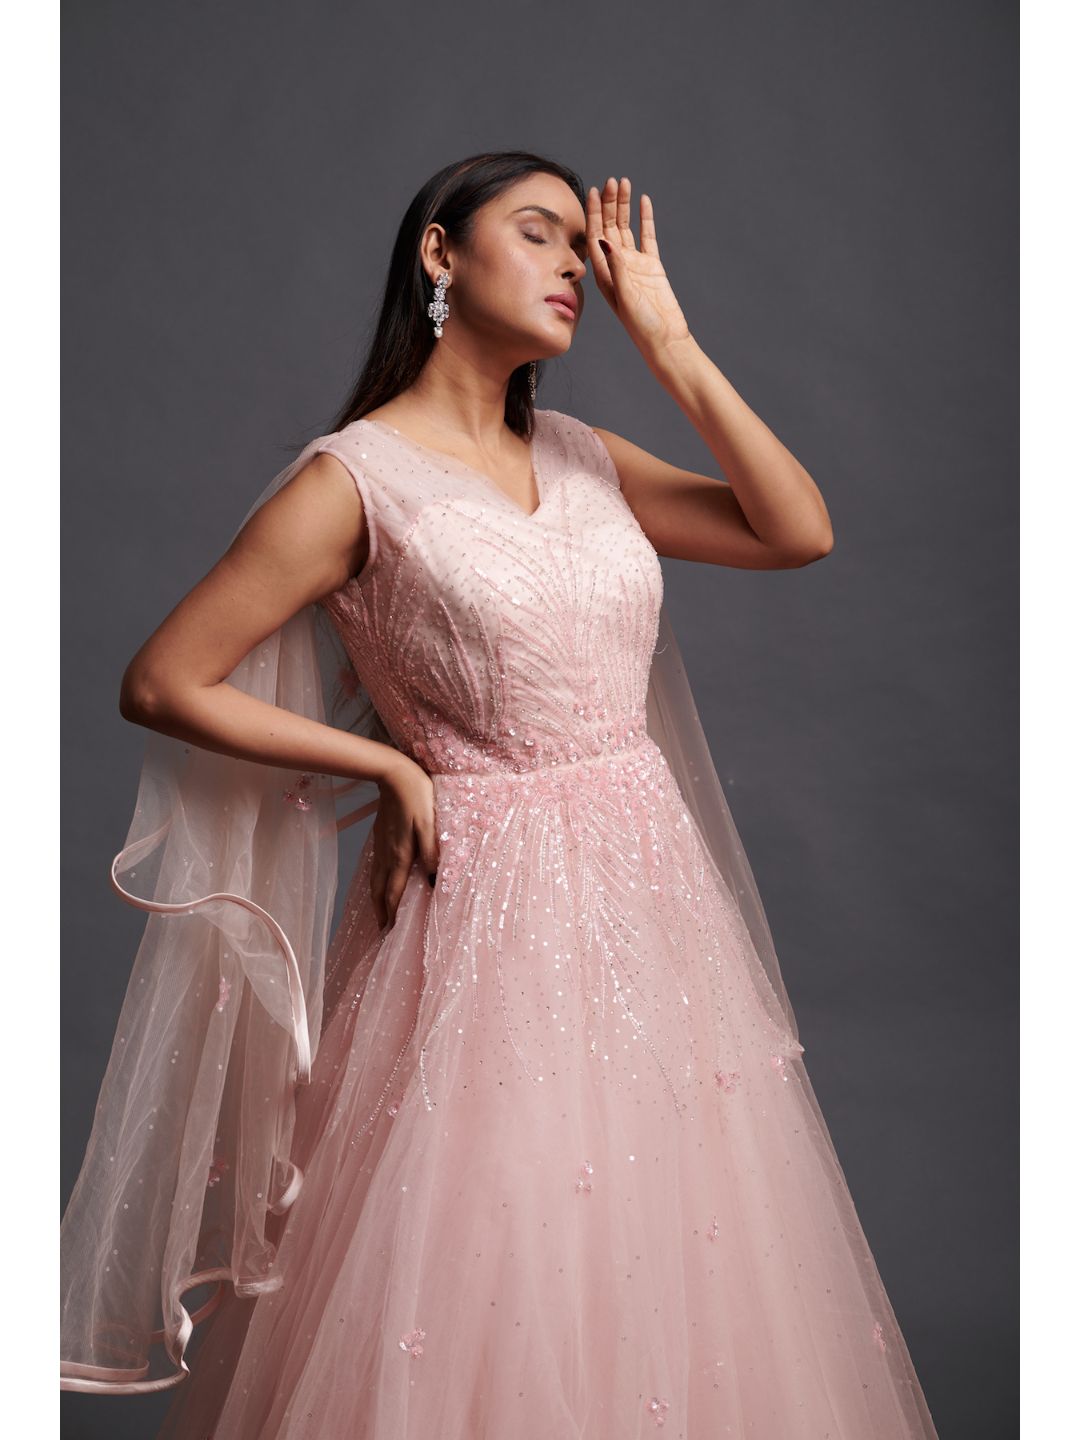 Buy Sayyoni Sumptuous Off White and Baby Pink Net Gown Suit online   Looksgudin